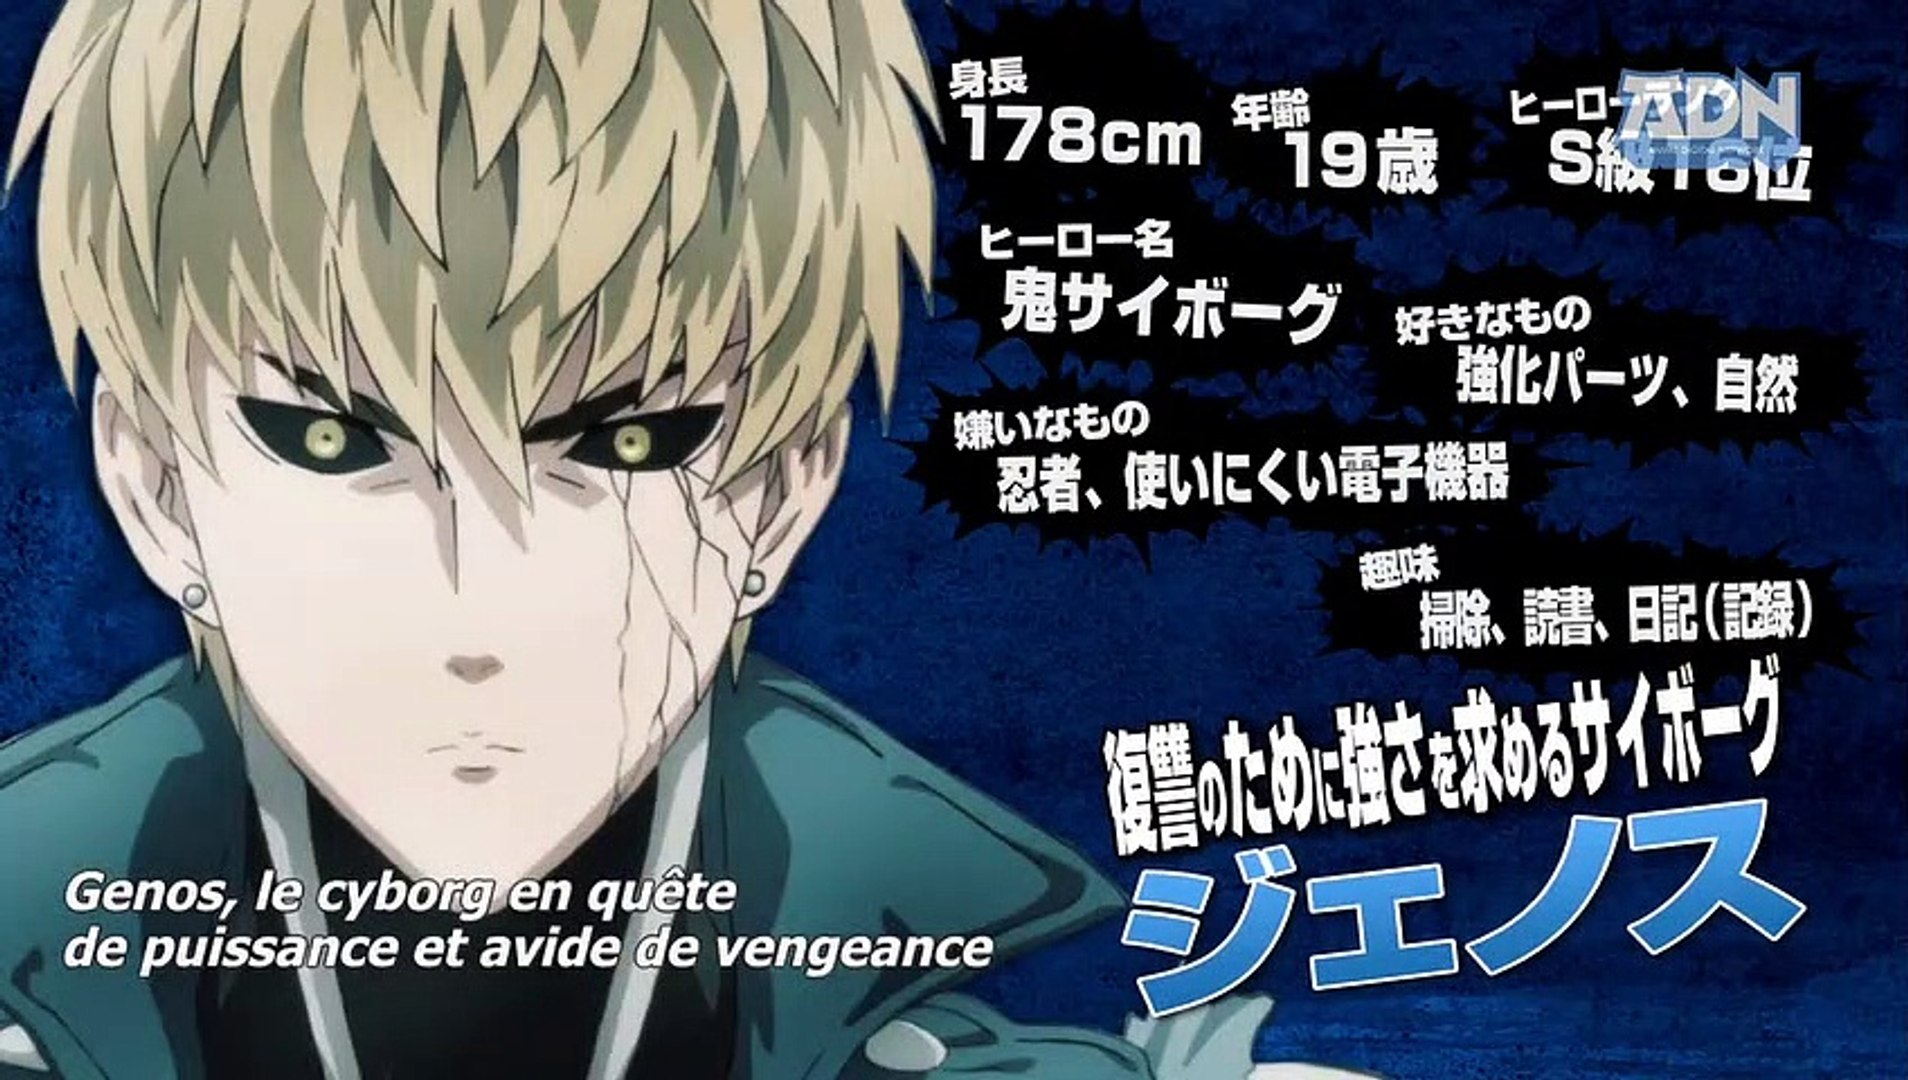 One Punch Man - saison 2 Bande-annonce (3) VO - Vidéo Dailymotion